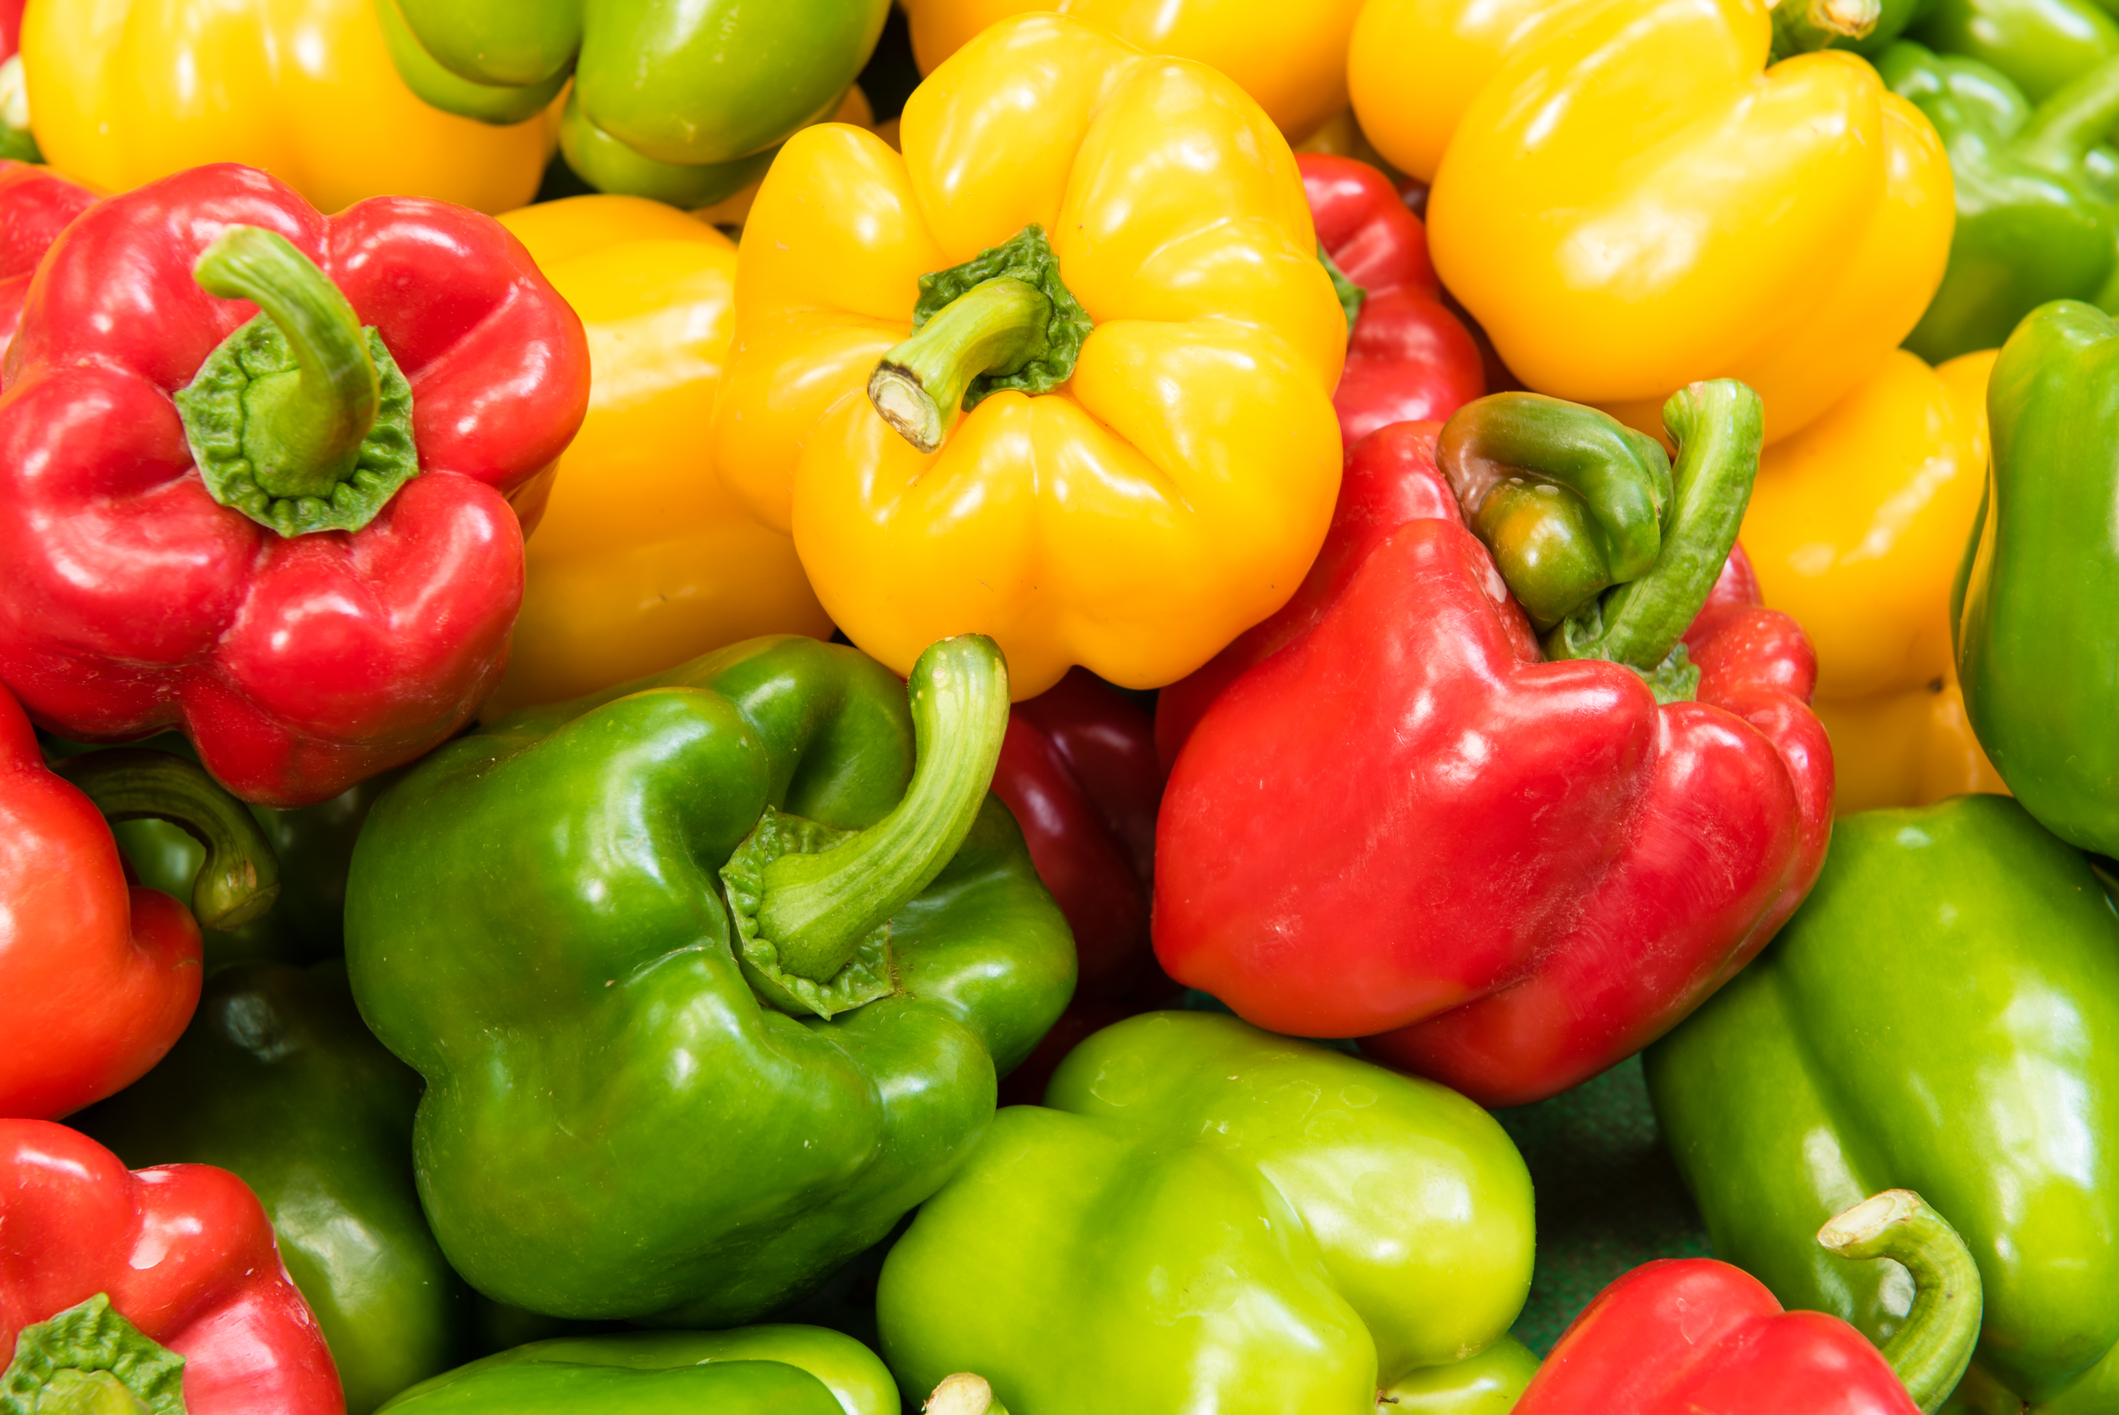 Assortment of bell peppers